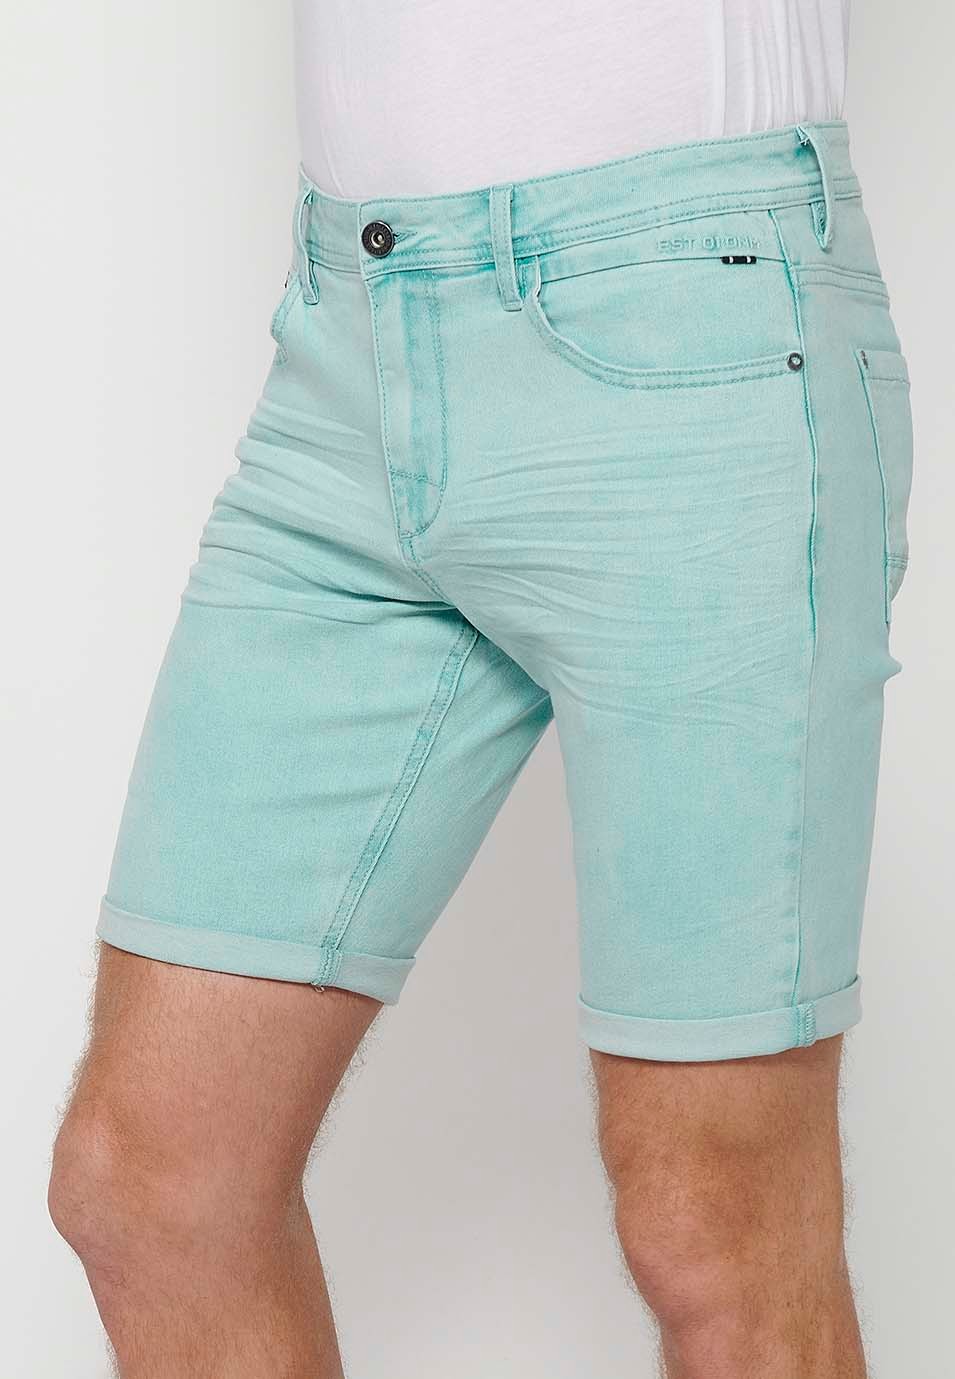 Shorts with turn-up closure with front zipper and button closure and five pockets, one blue pocket pocket for Men 2